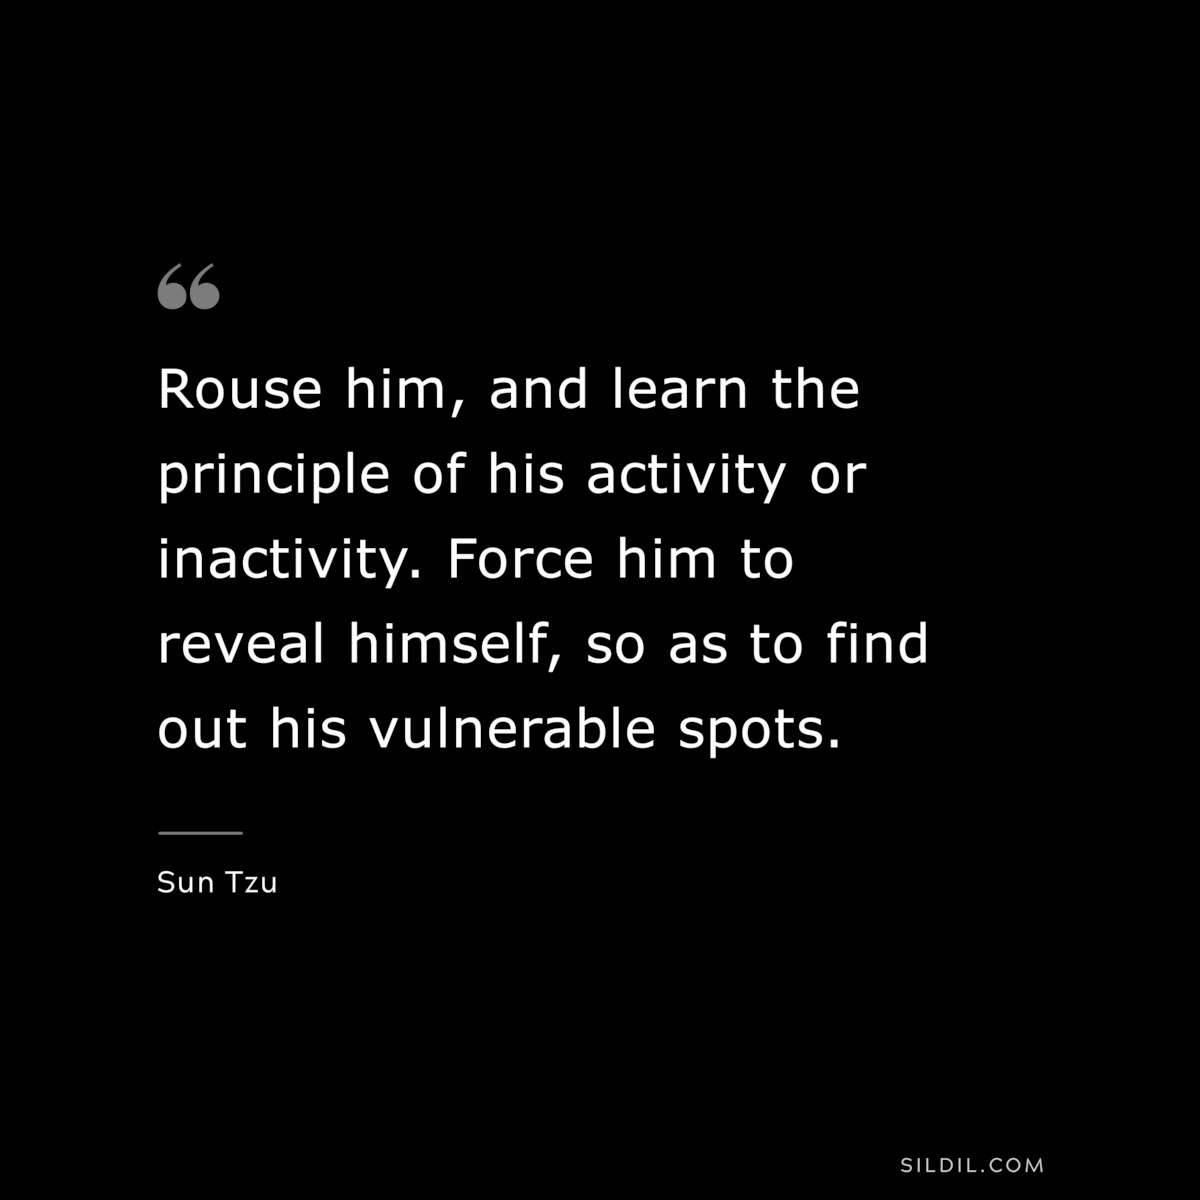 Rouse him, and learn the principle of his activity or inactivity. Force him to reveal himself, so as to find out his vulnerable spots.― Sun Tzu